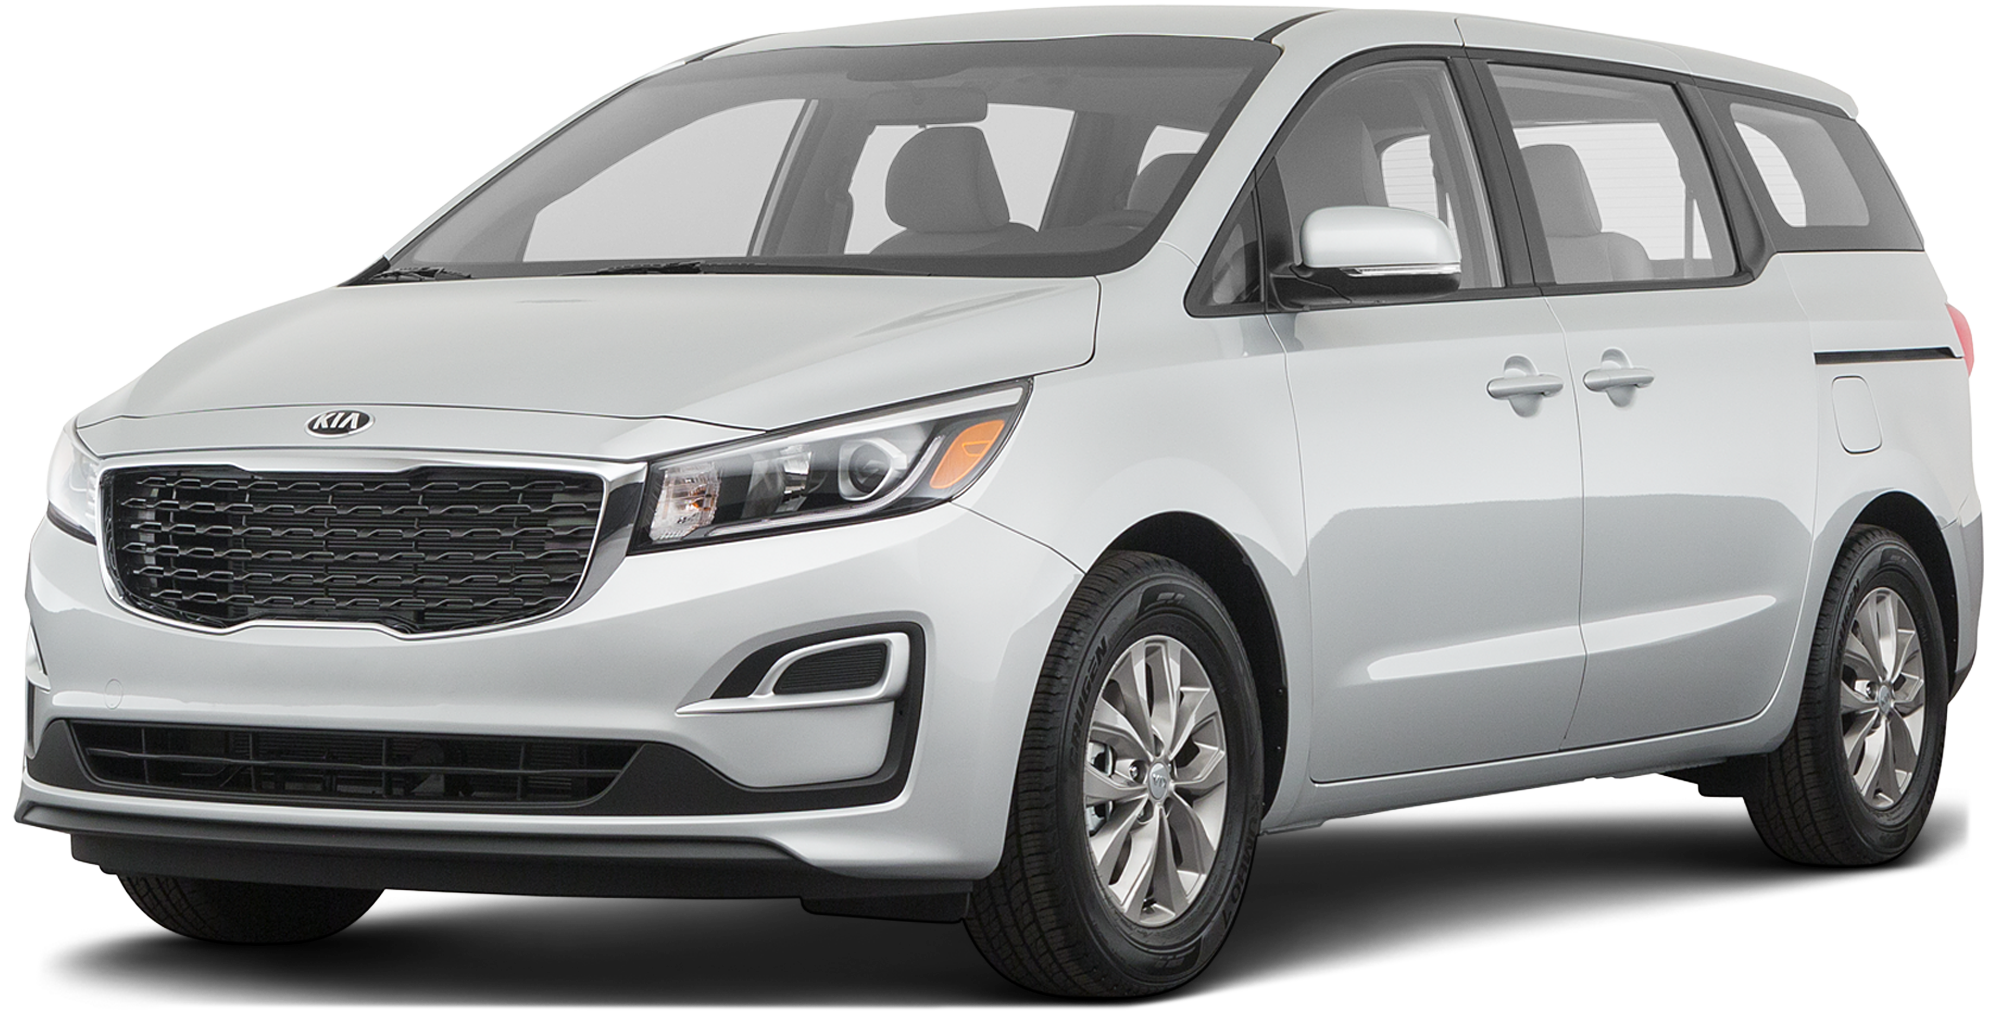 2019-kia-sedona-incentives-specials-offers-in-yonkers-ny